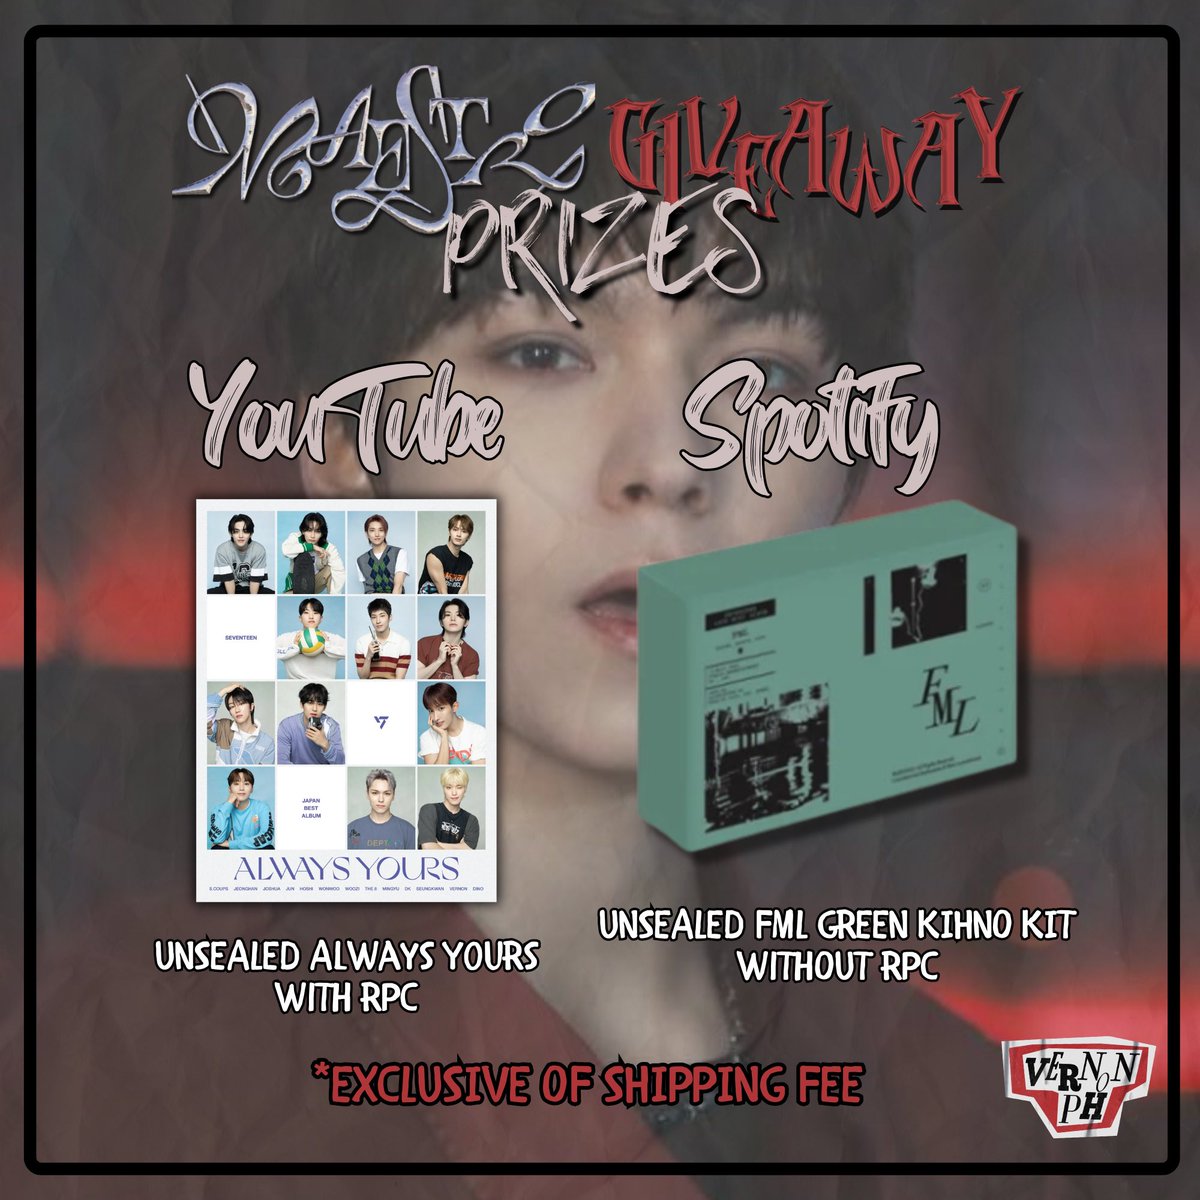 #VNPH | 'MAESTRO' MV Streaming Giveaway! 🪄 Following the #MAESTRO's lead, tune in & stream SEVENTEEN's new comeback 'MAESTRO' for a chance to win exciting prizes! How to join? See FULL DETAILS below! ⬇️ #SEVENTEEN #세븐틴 #17_IS_RIGHT_HERE #VERNON #버논 @pledis_17